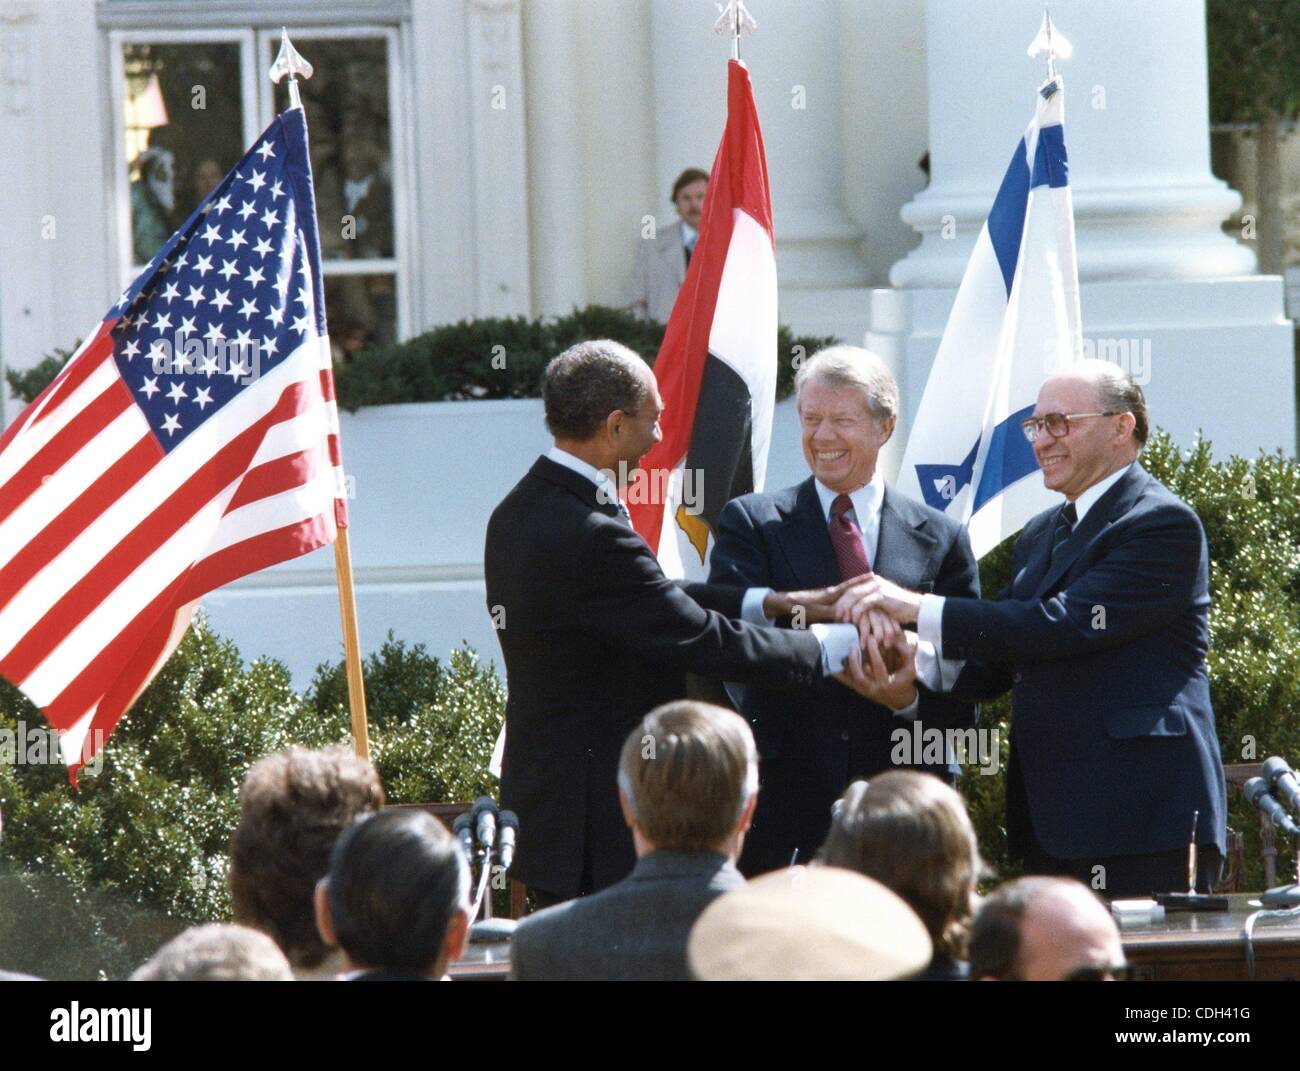 Jan. 27, 2011 - Washington, DISTRICT OF COLUMBIA, U.S. - (FILE) A file picture dated 26 March 1979 shows US President Jimmy Carter (C) with Israeli Prime Minister Menachem Begin (R) and Egyptian President Anwar al Sadat during the signing ceremony for a peace agreement between Egypt and Israel at th Stock Photo